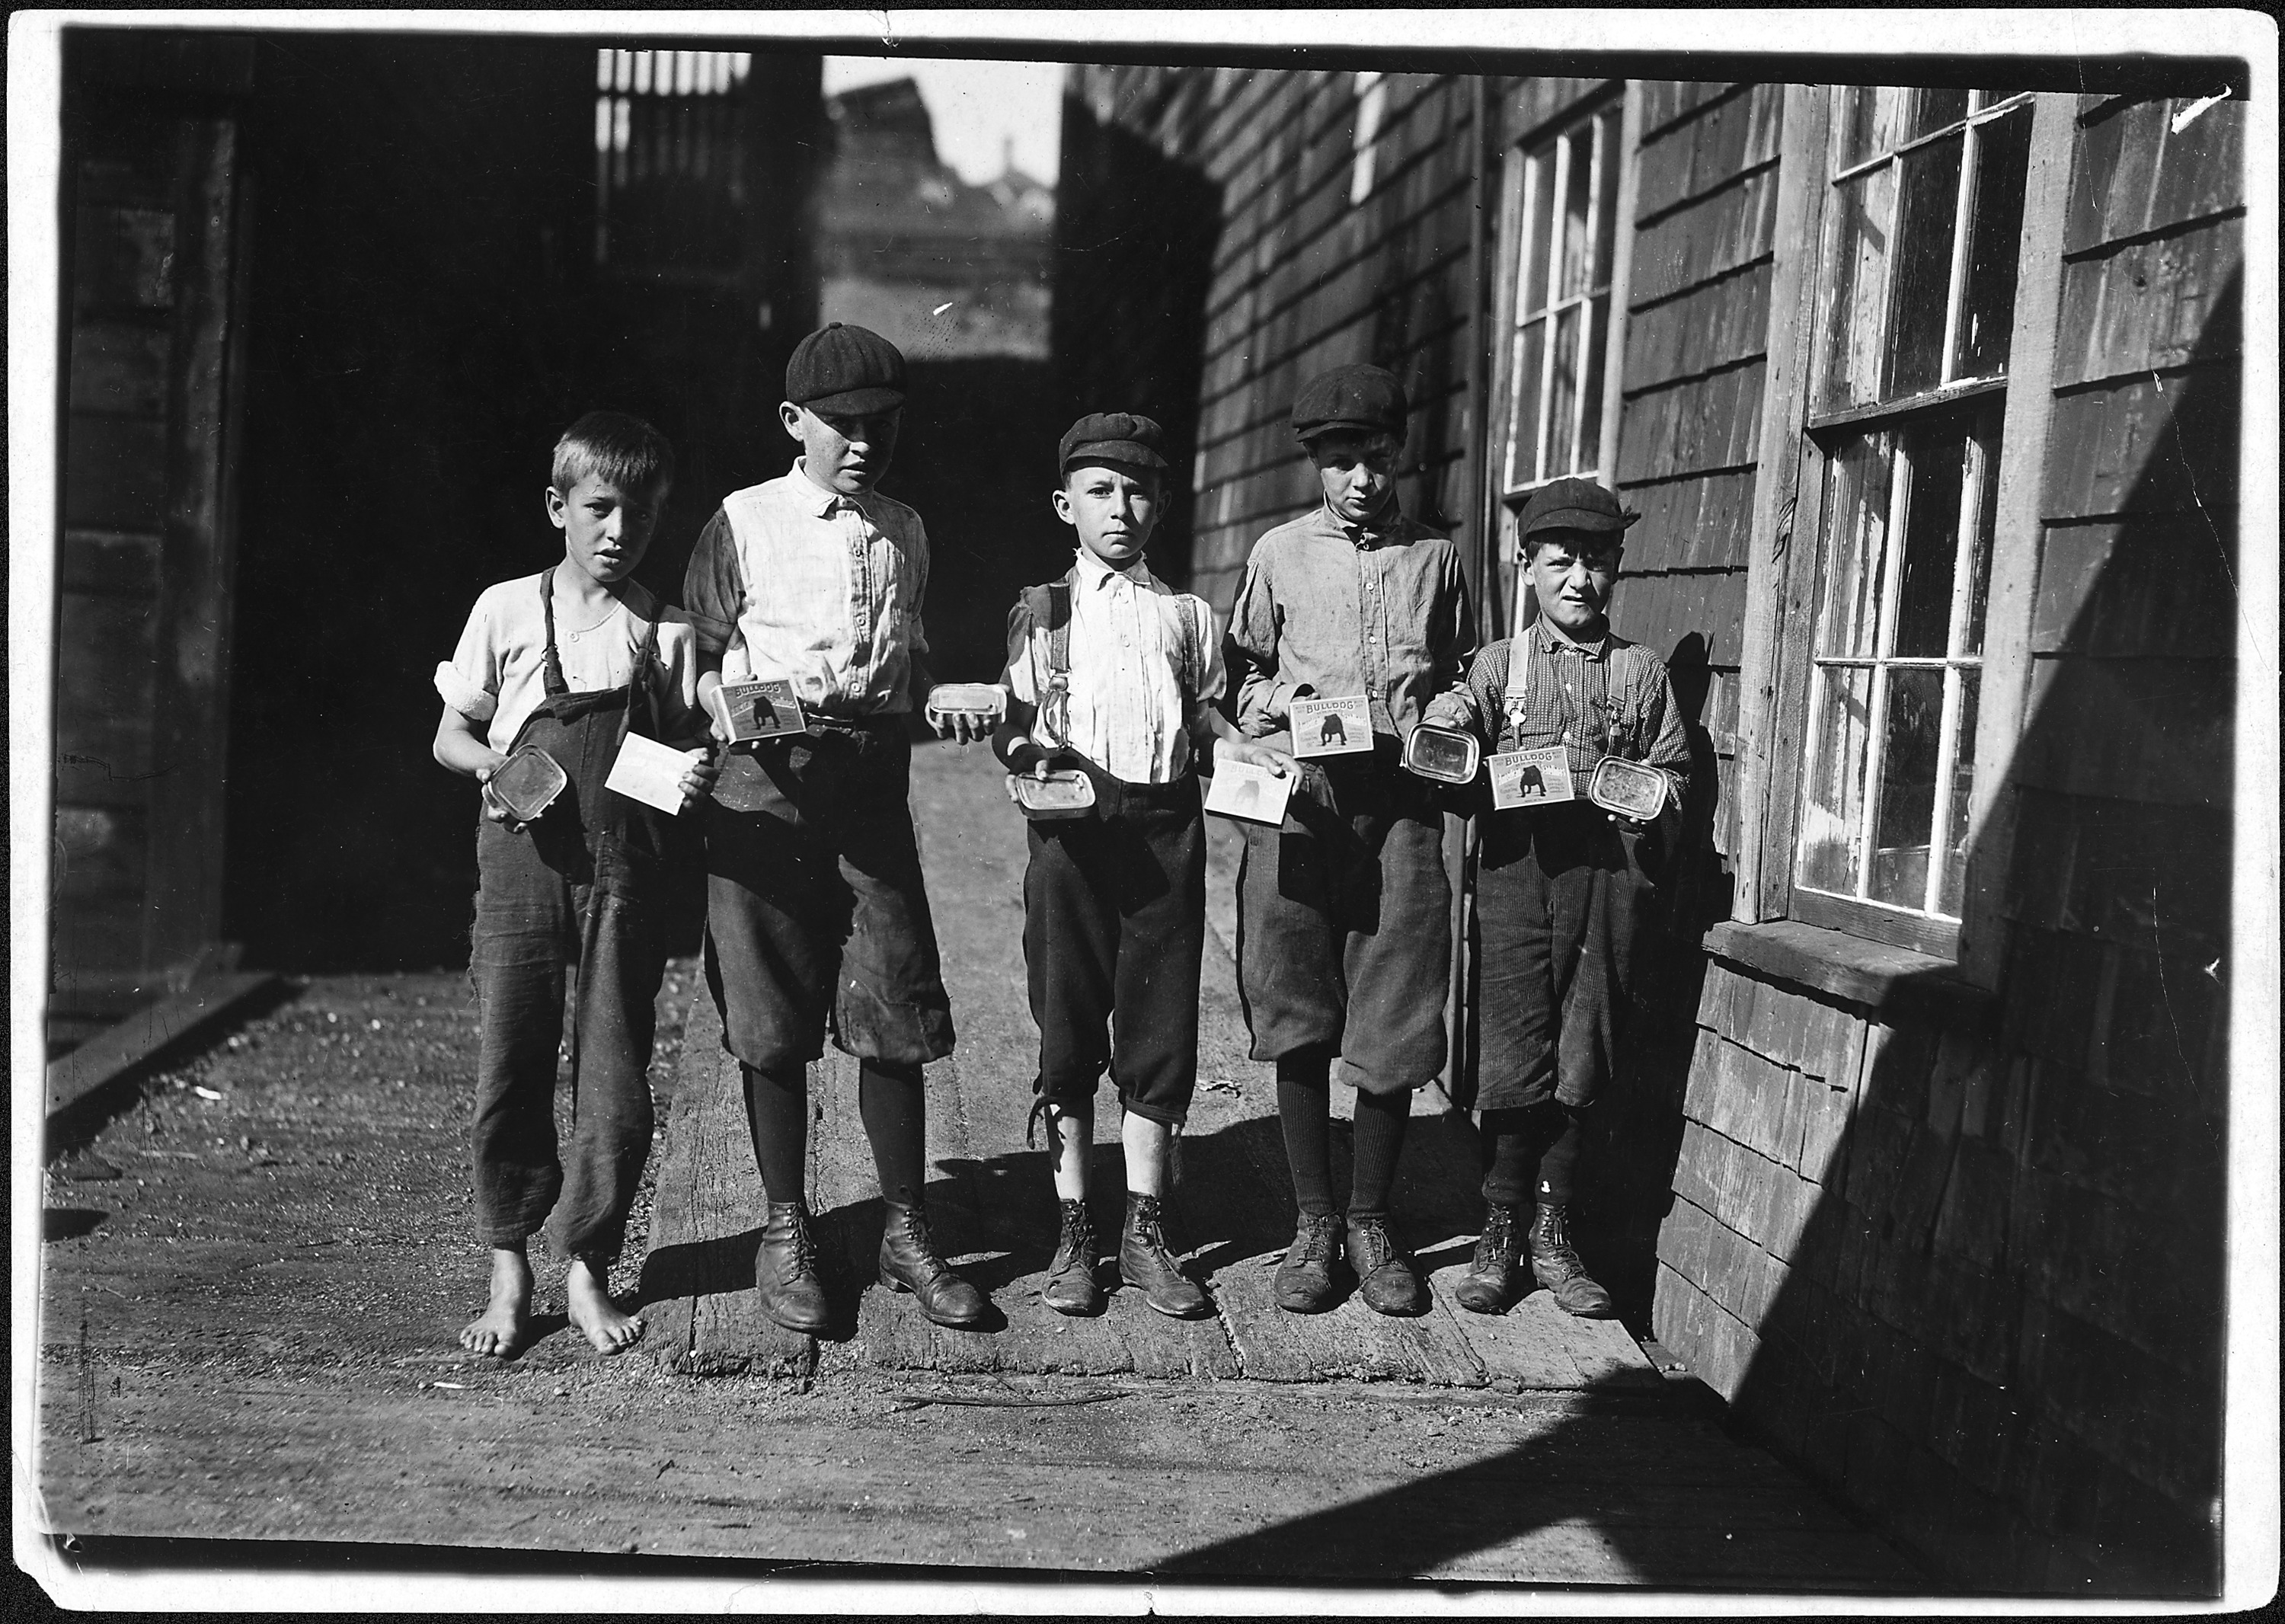 Some of the cartoners, not the youngest, at Seacoast Canning Co. Eastport, Me. - NARA - 523448